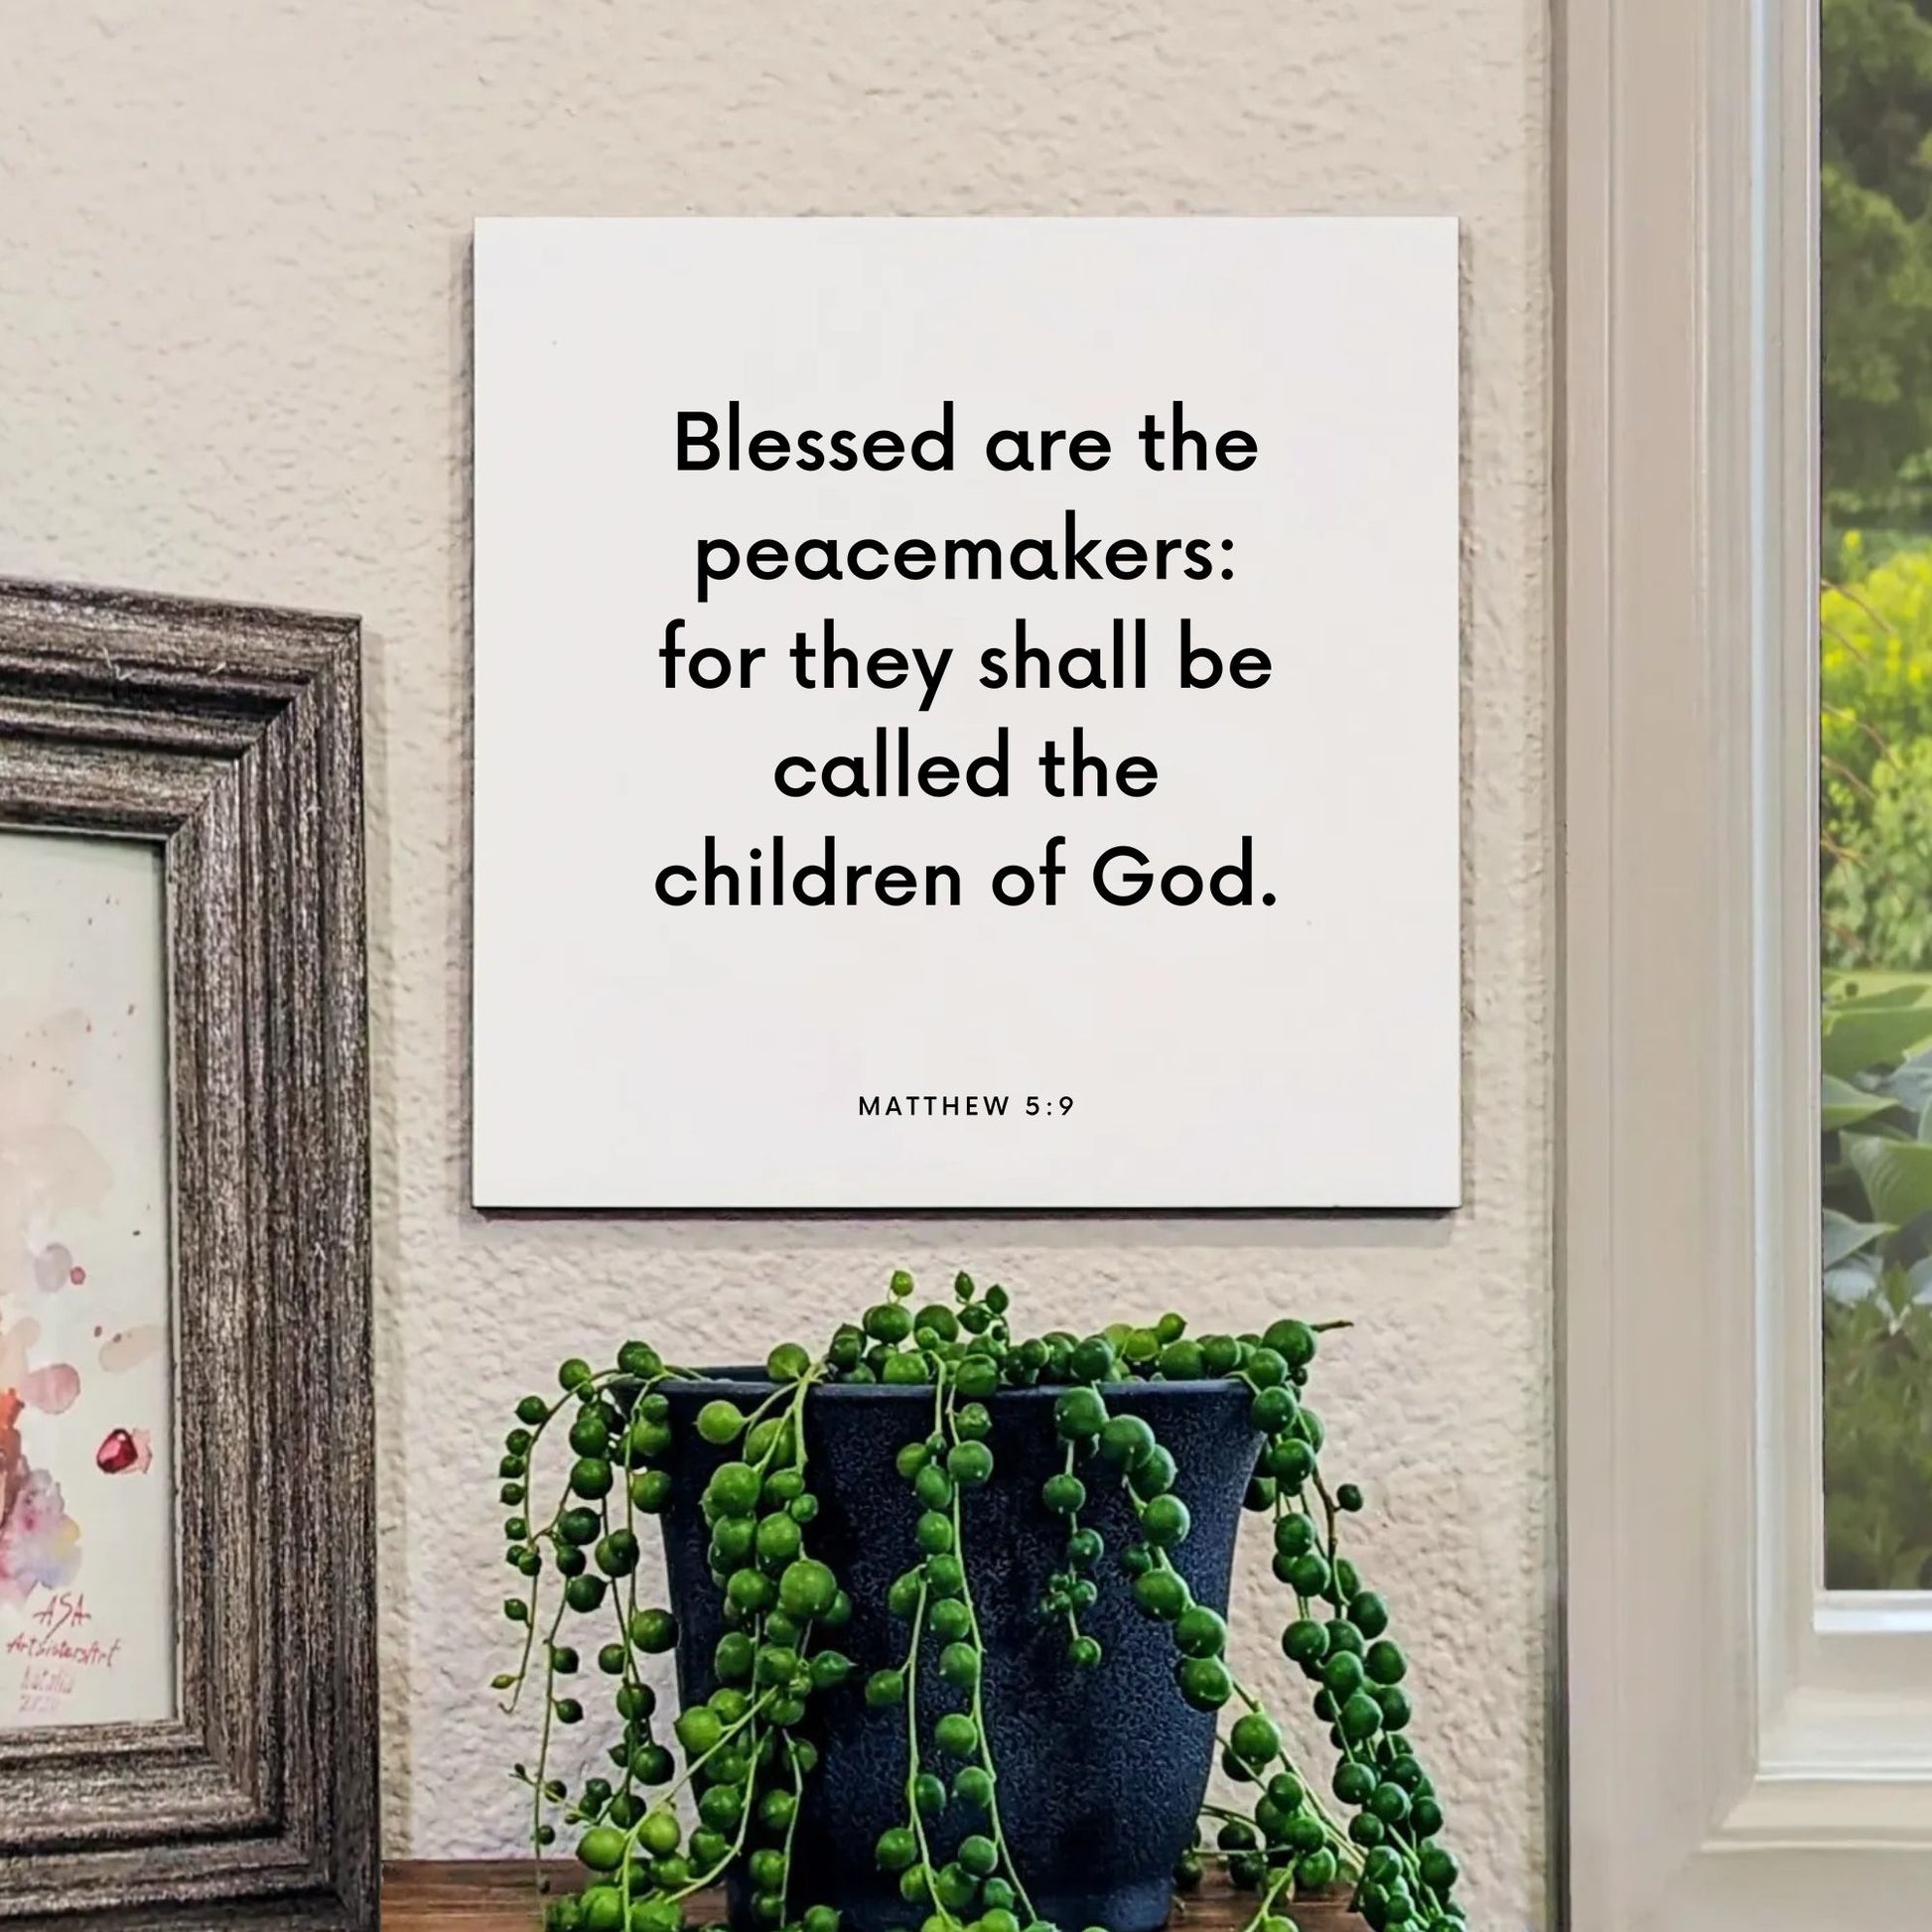 Window mouting of the scripture tile for Matthew 5:9 - "Blessed are the peacemakers"